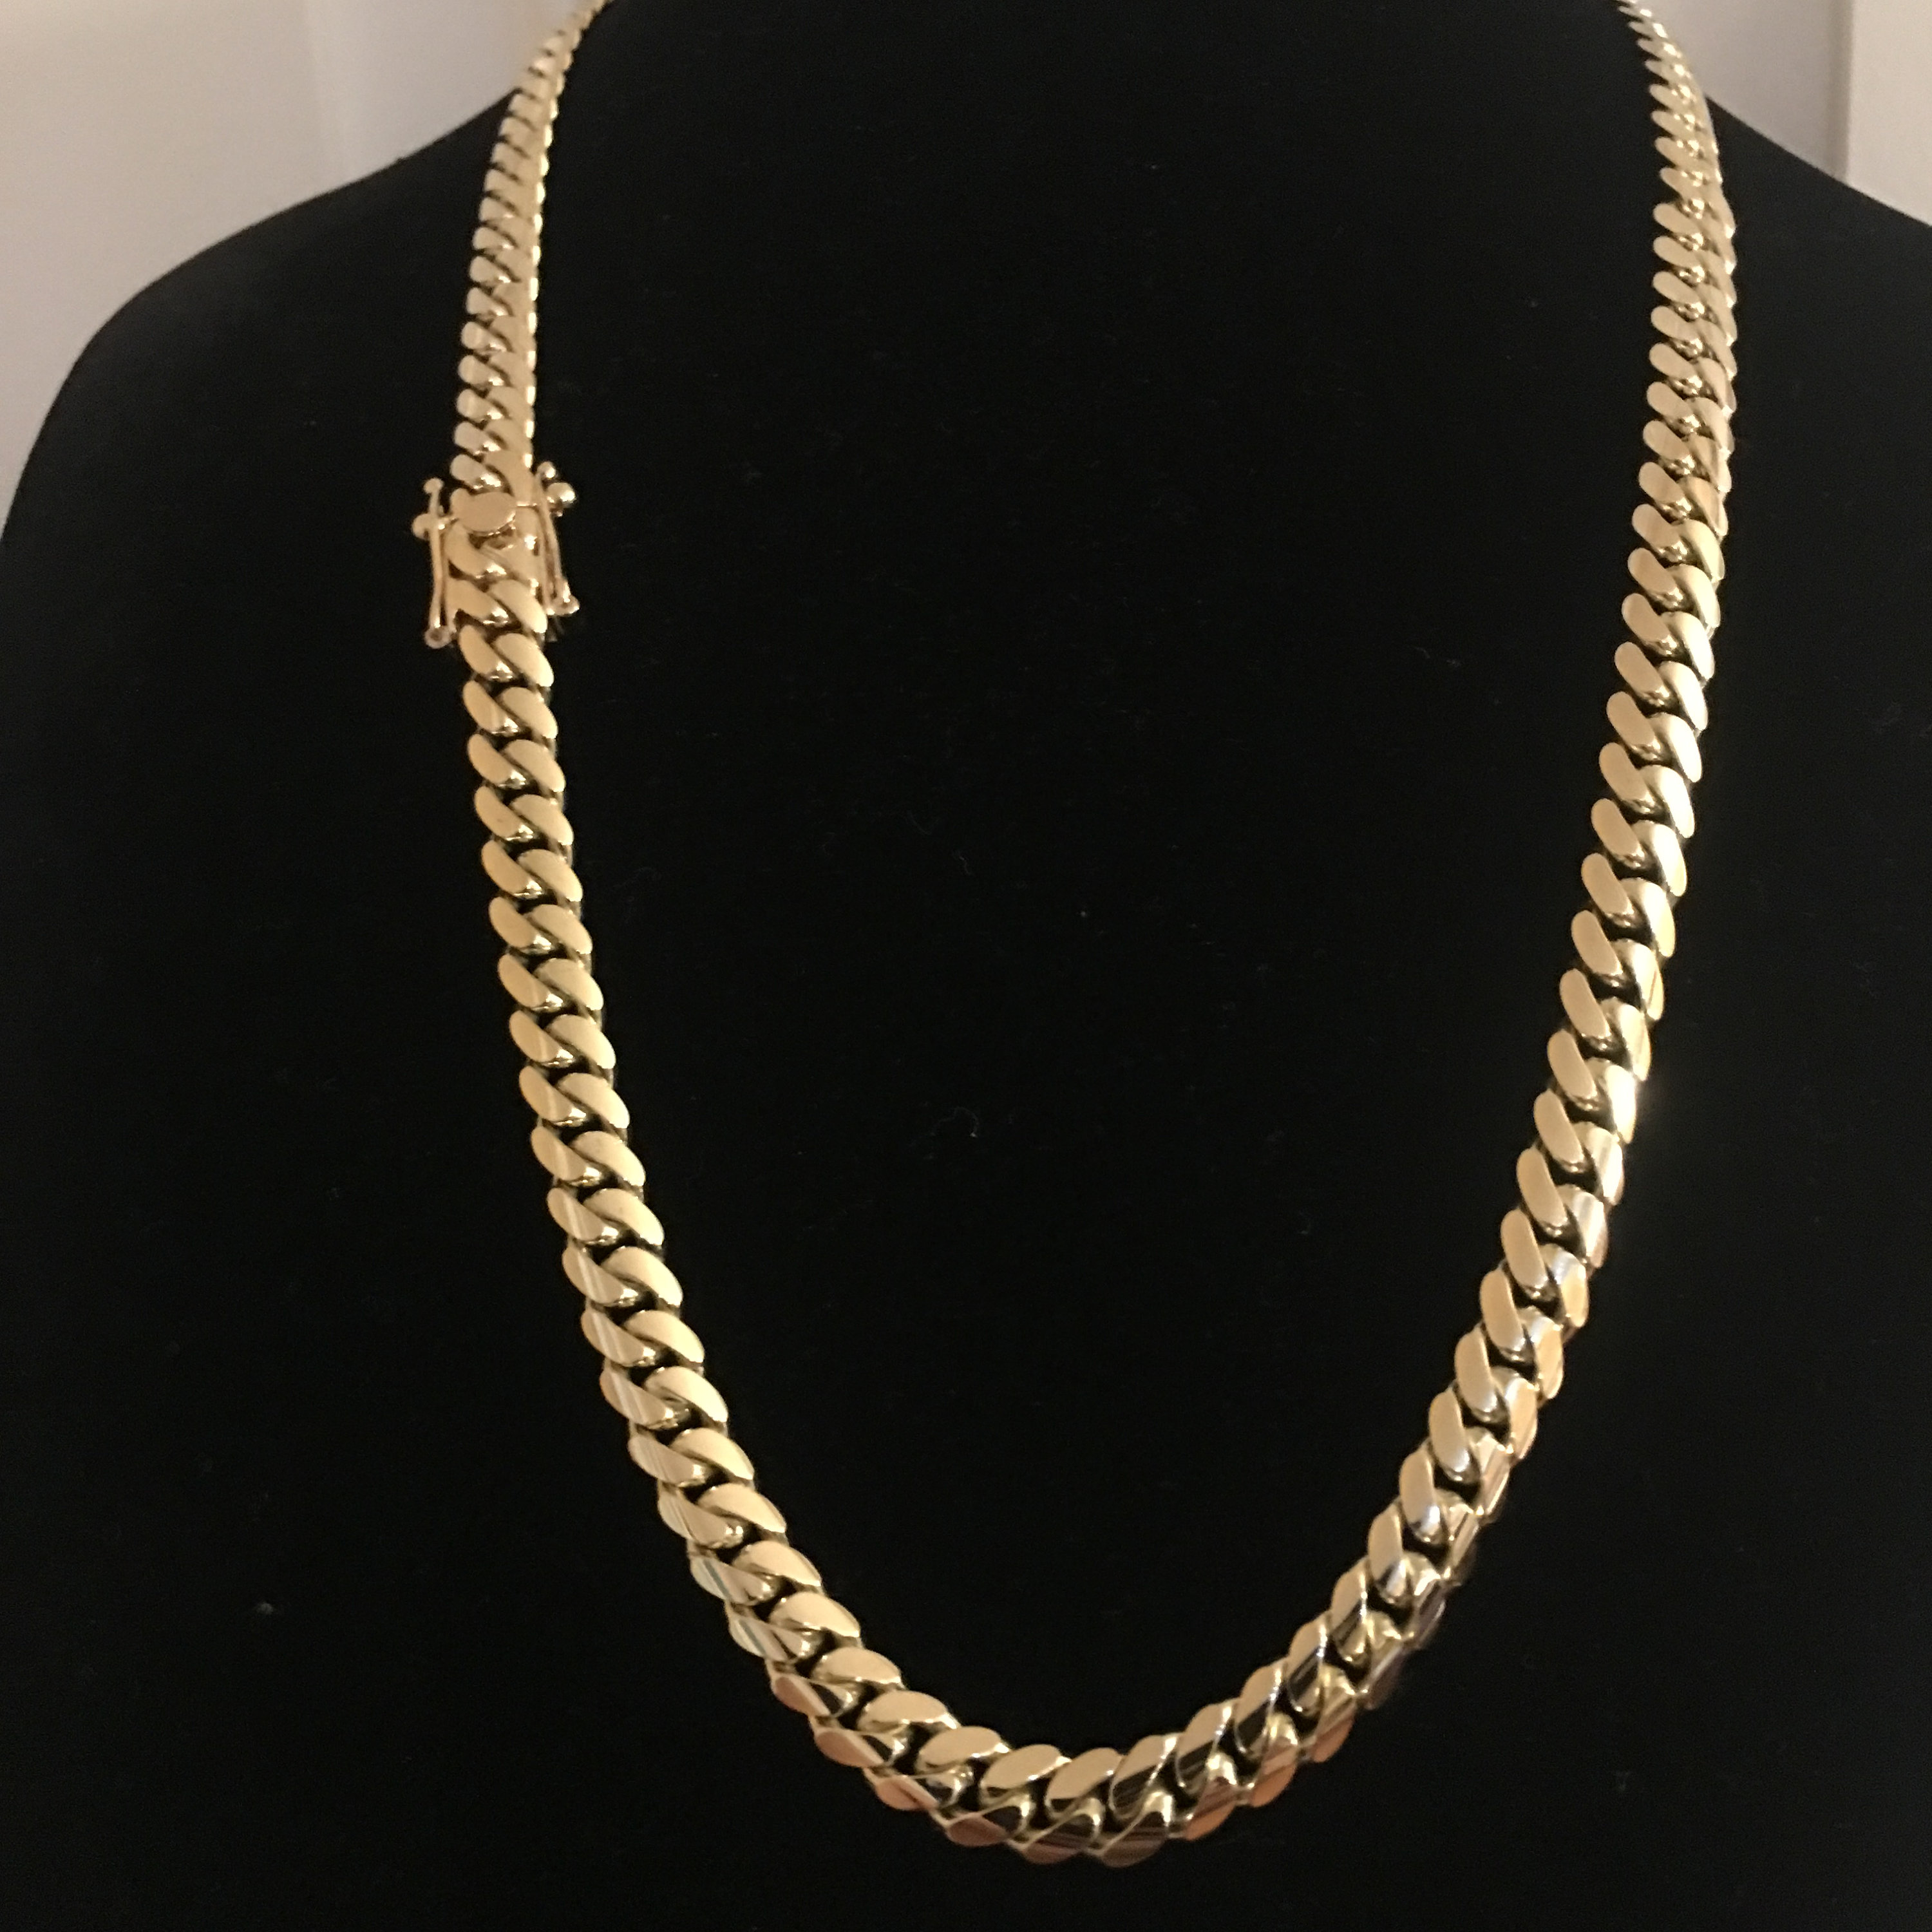 8.5mm 24 inchs10k gold hand made cuban link chain 100 grams | Etsy